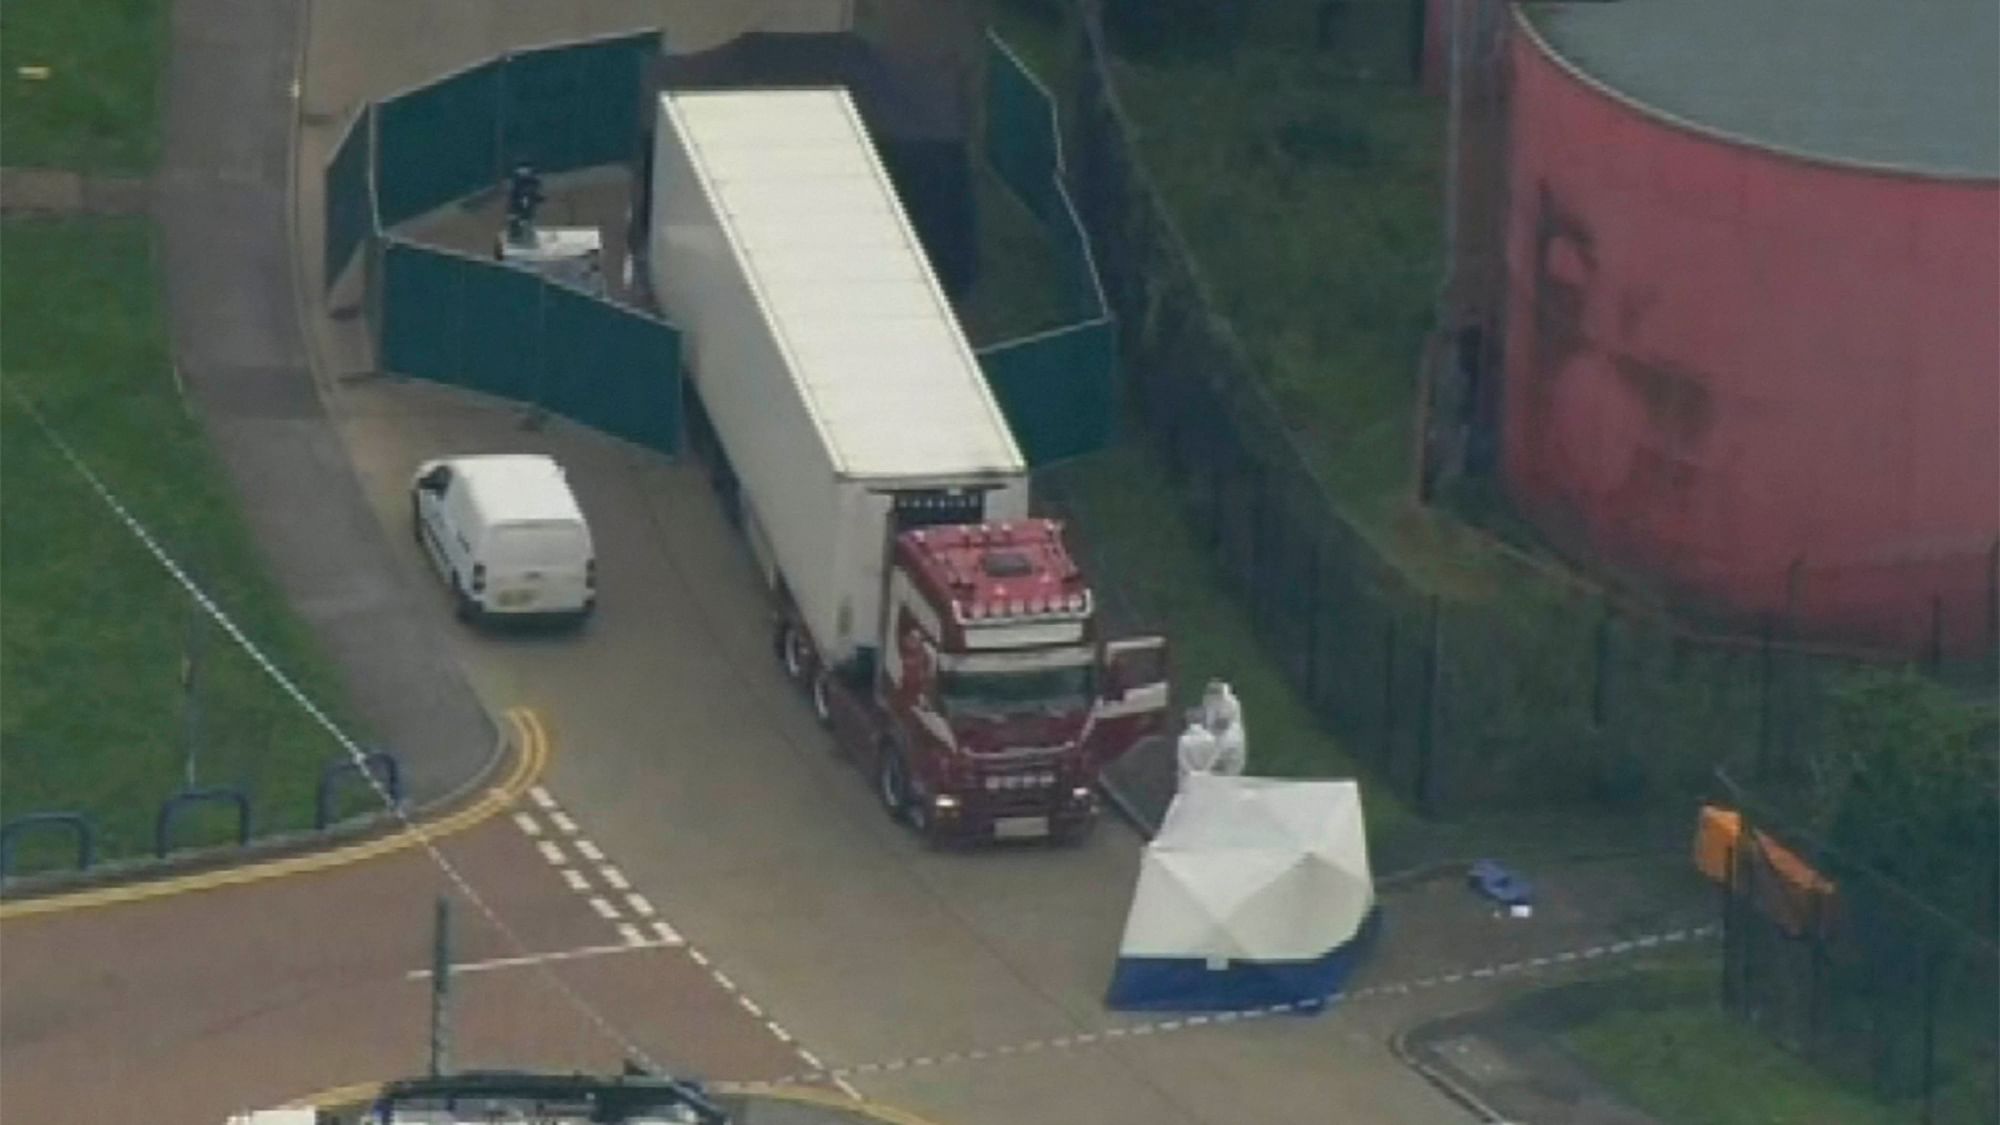 Police forensic officers attend the scene after a truck was found to contain a large number of dead bodies, in South England.